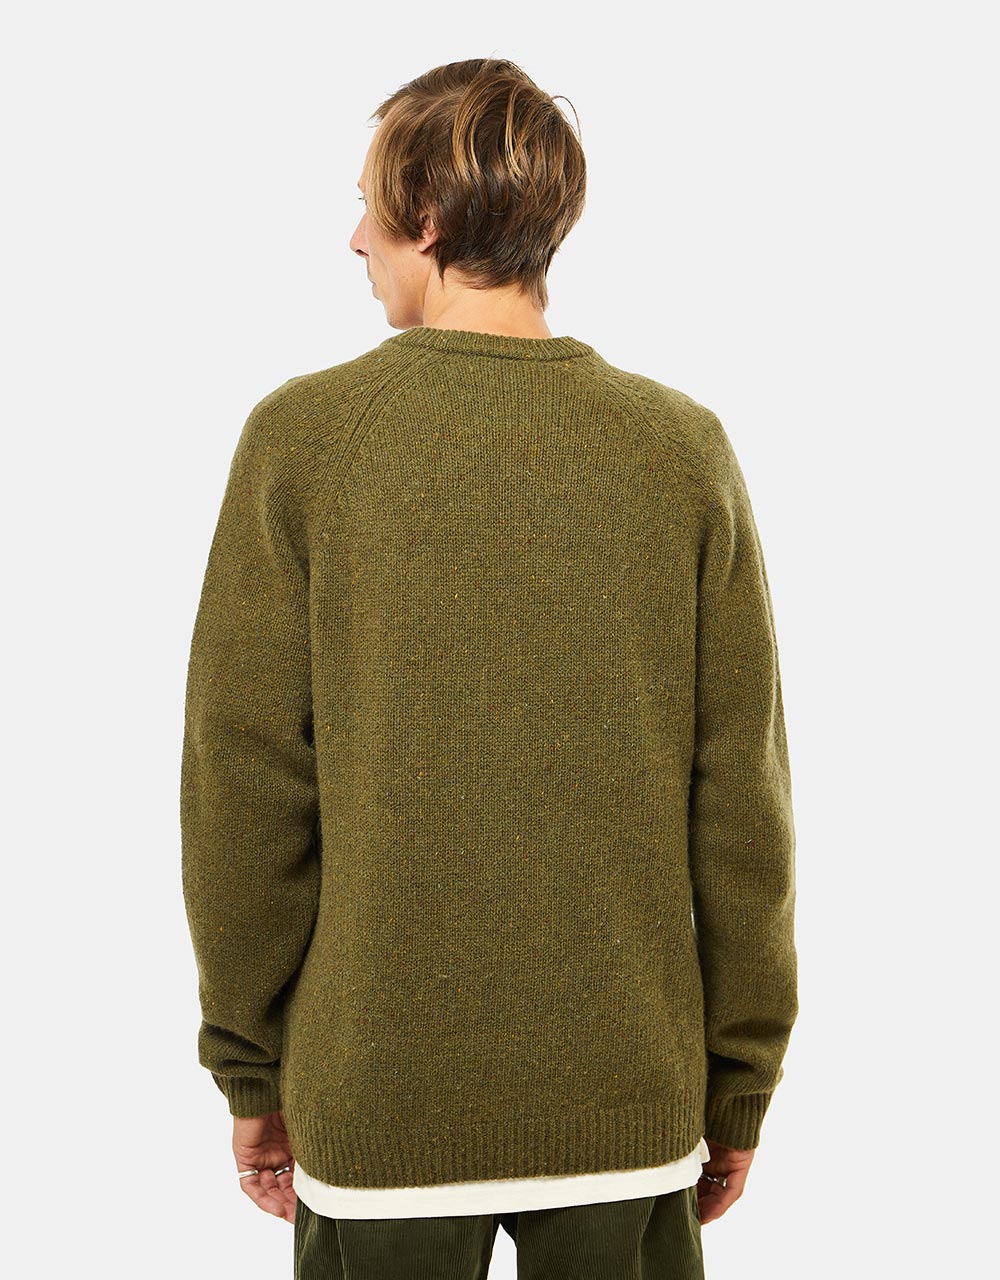 Carhartt WIP Anglistic Sweater - Speckled Highland